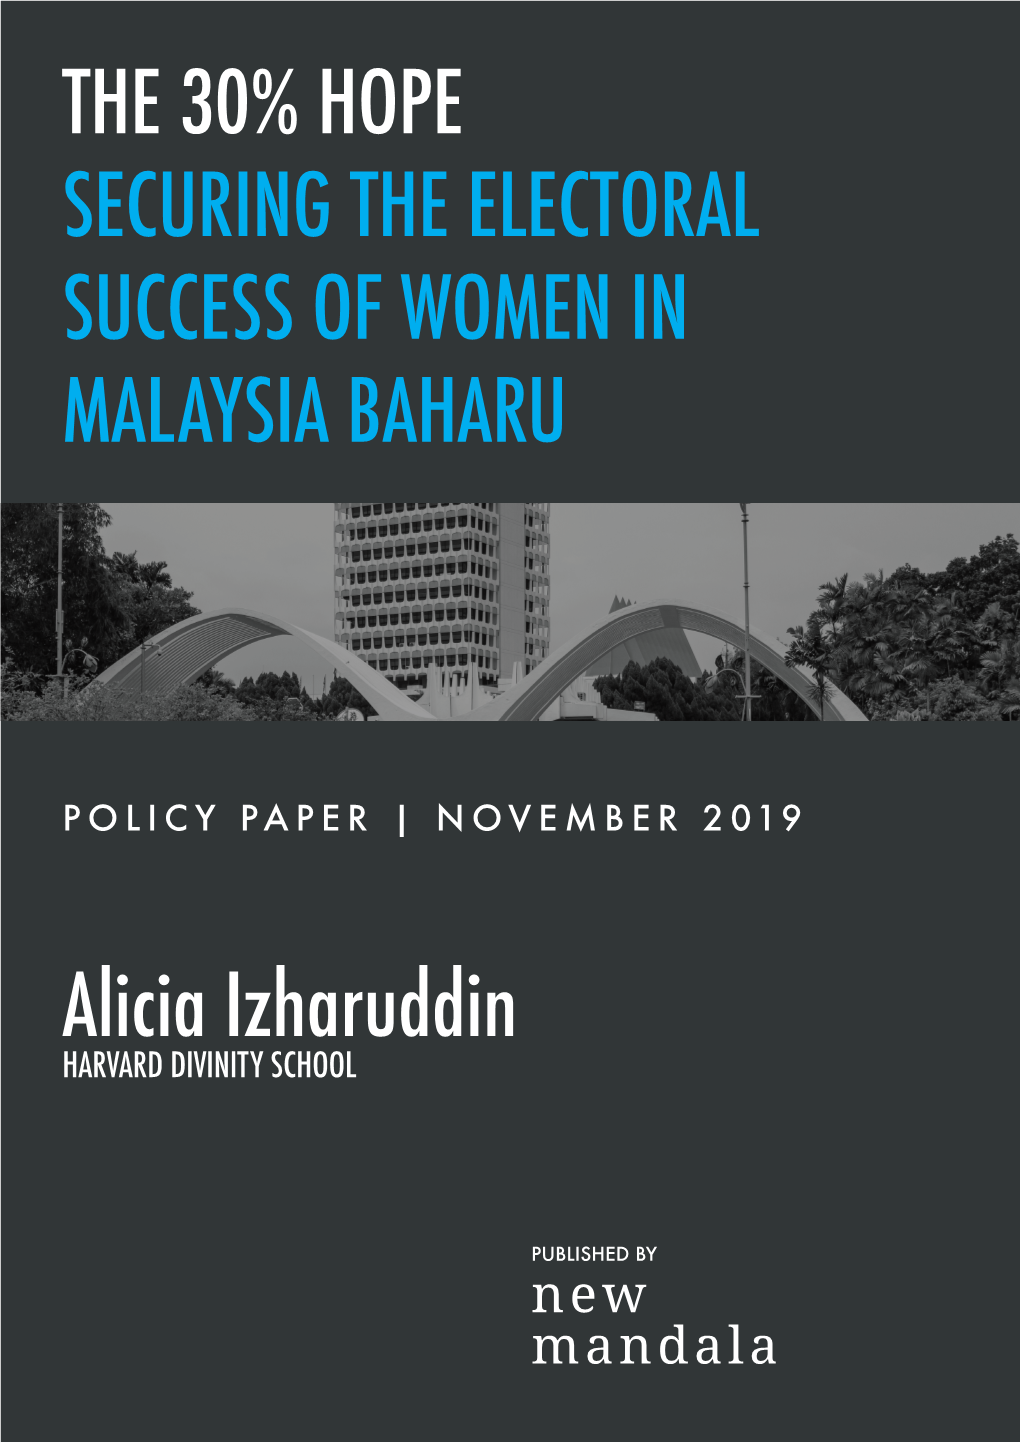 The 30% Hope Securing the Electoral Success of Women in Malaysia Baharu